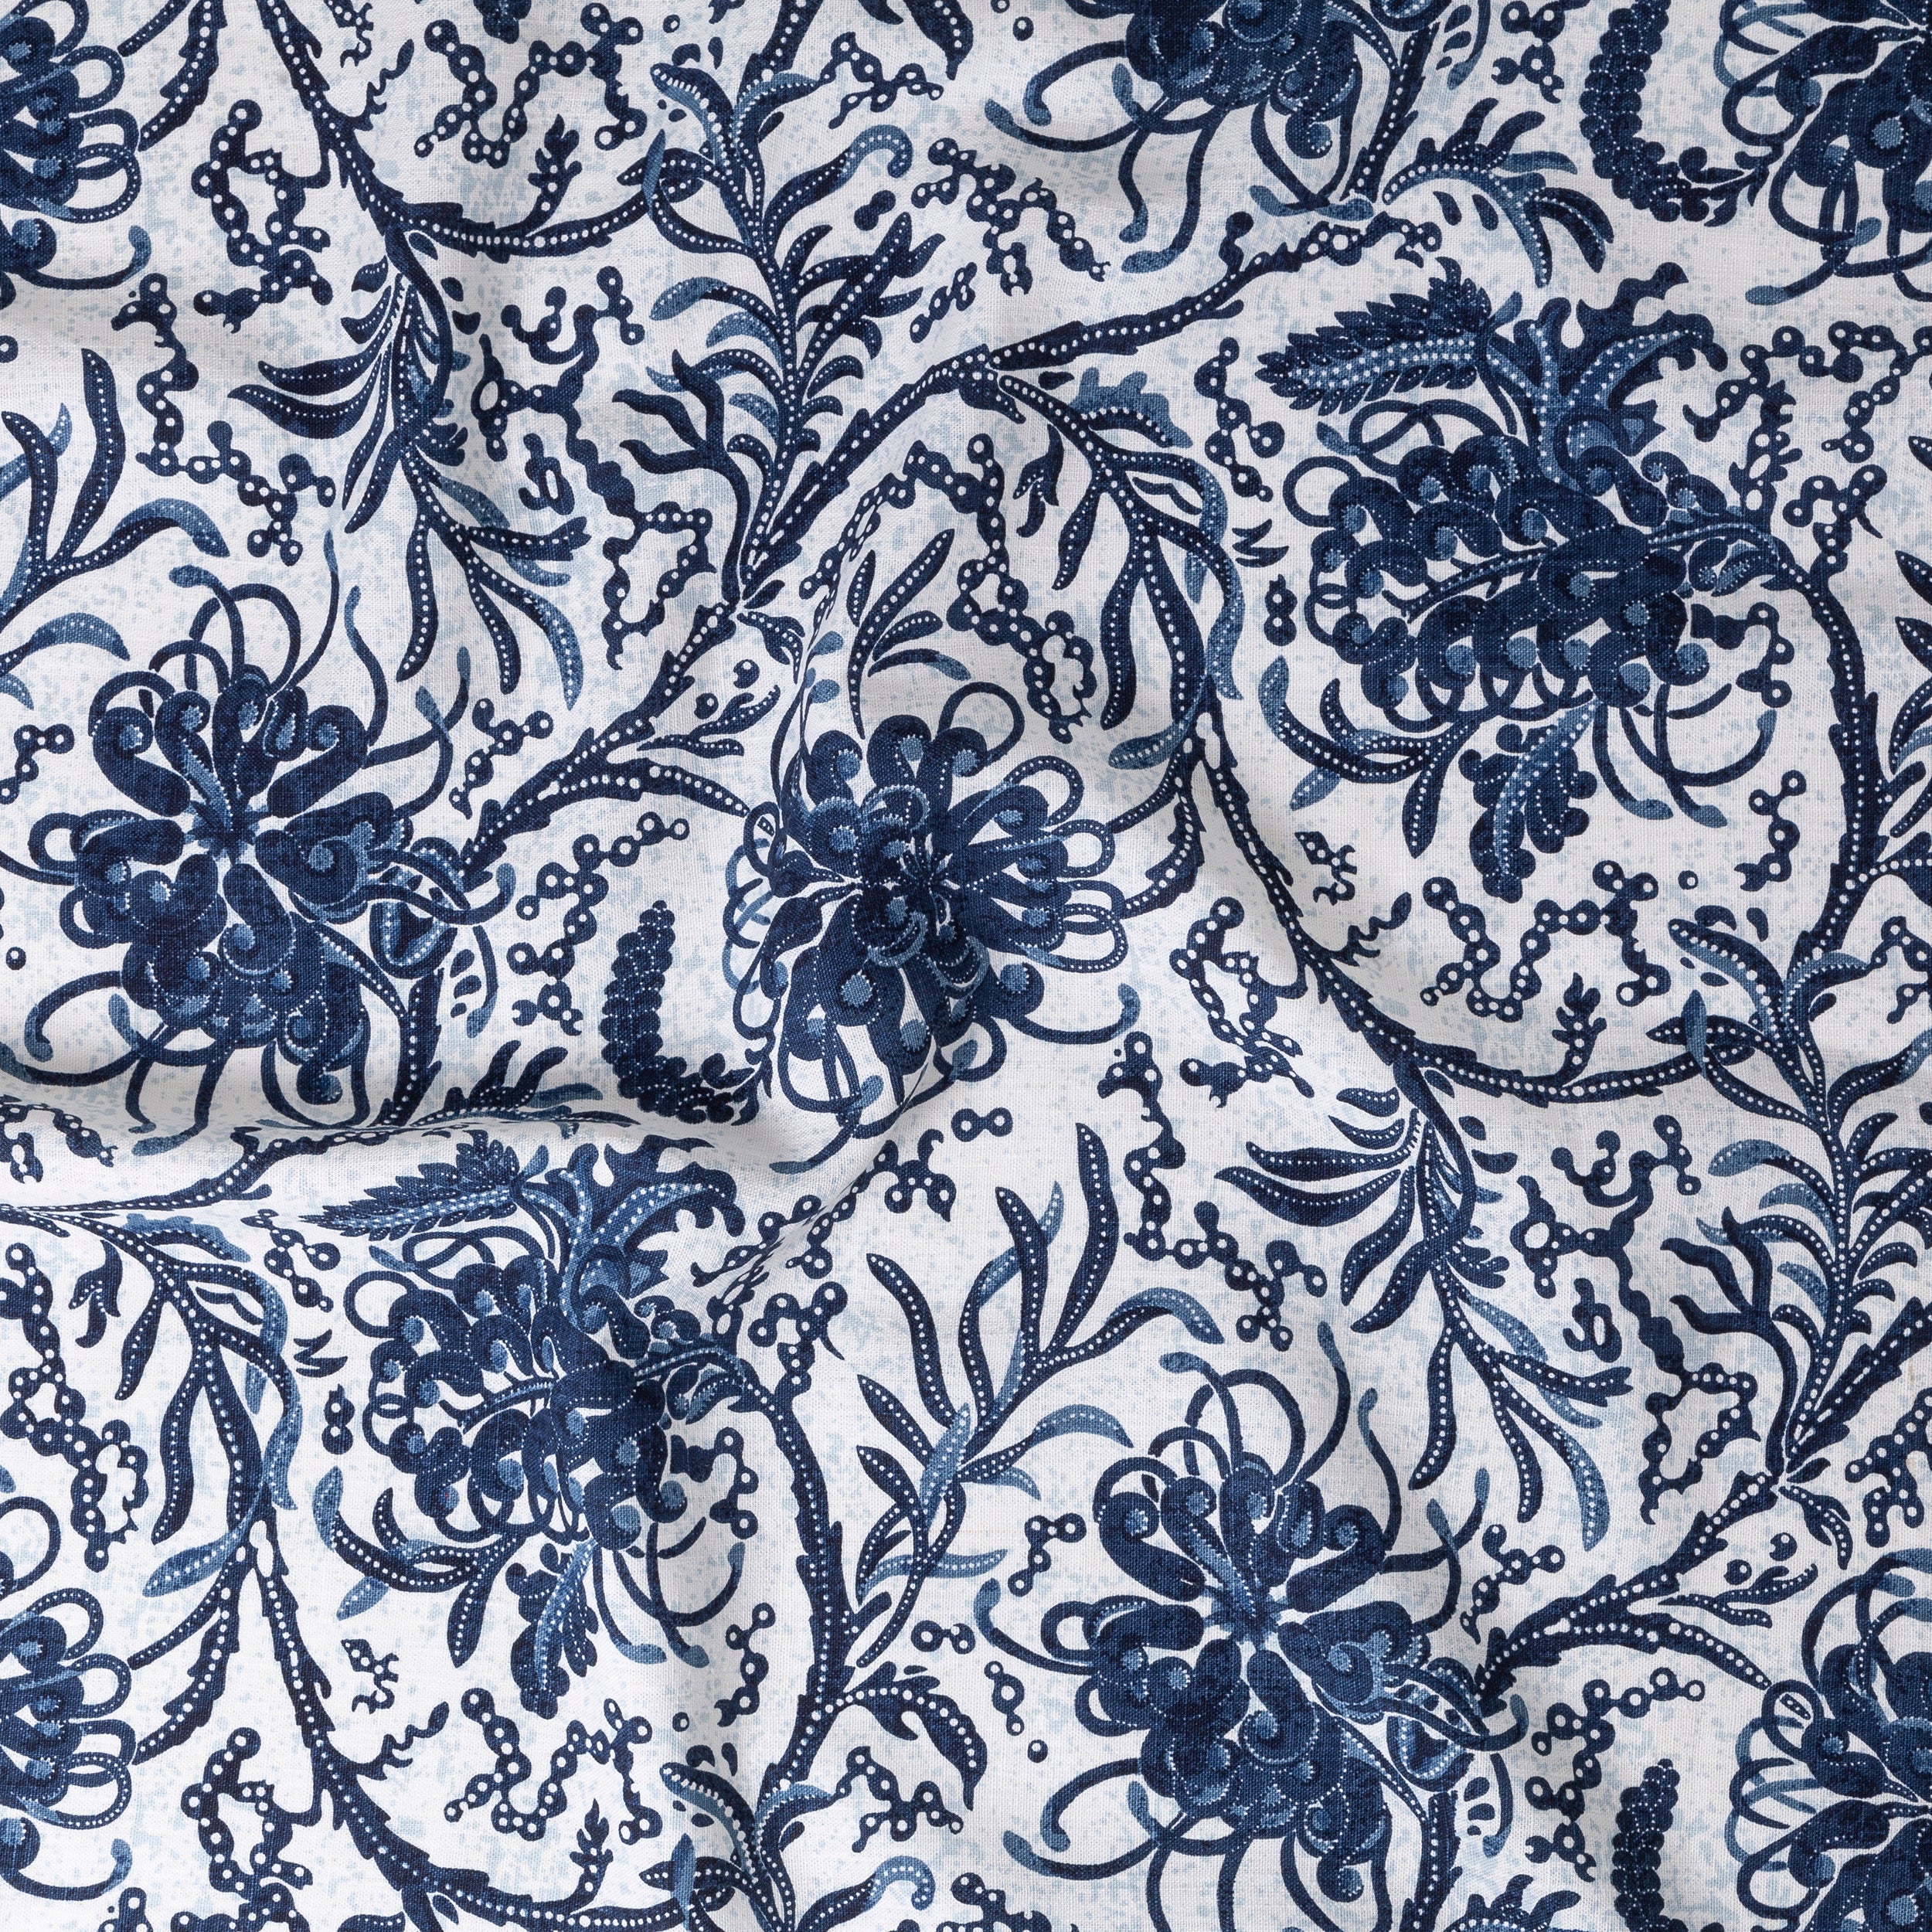 Draped fabric in a dense floral print in blue and navy on a white field.